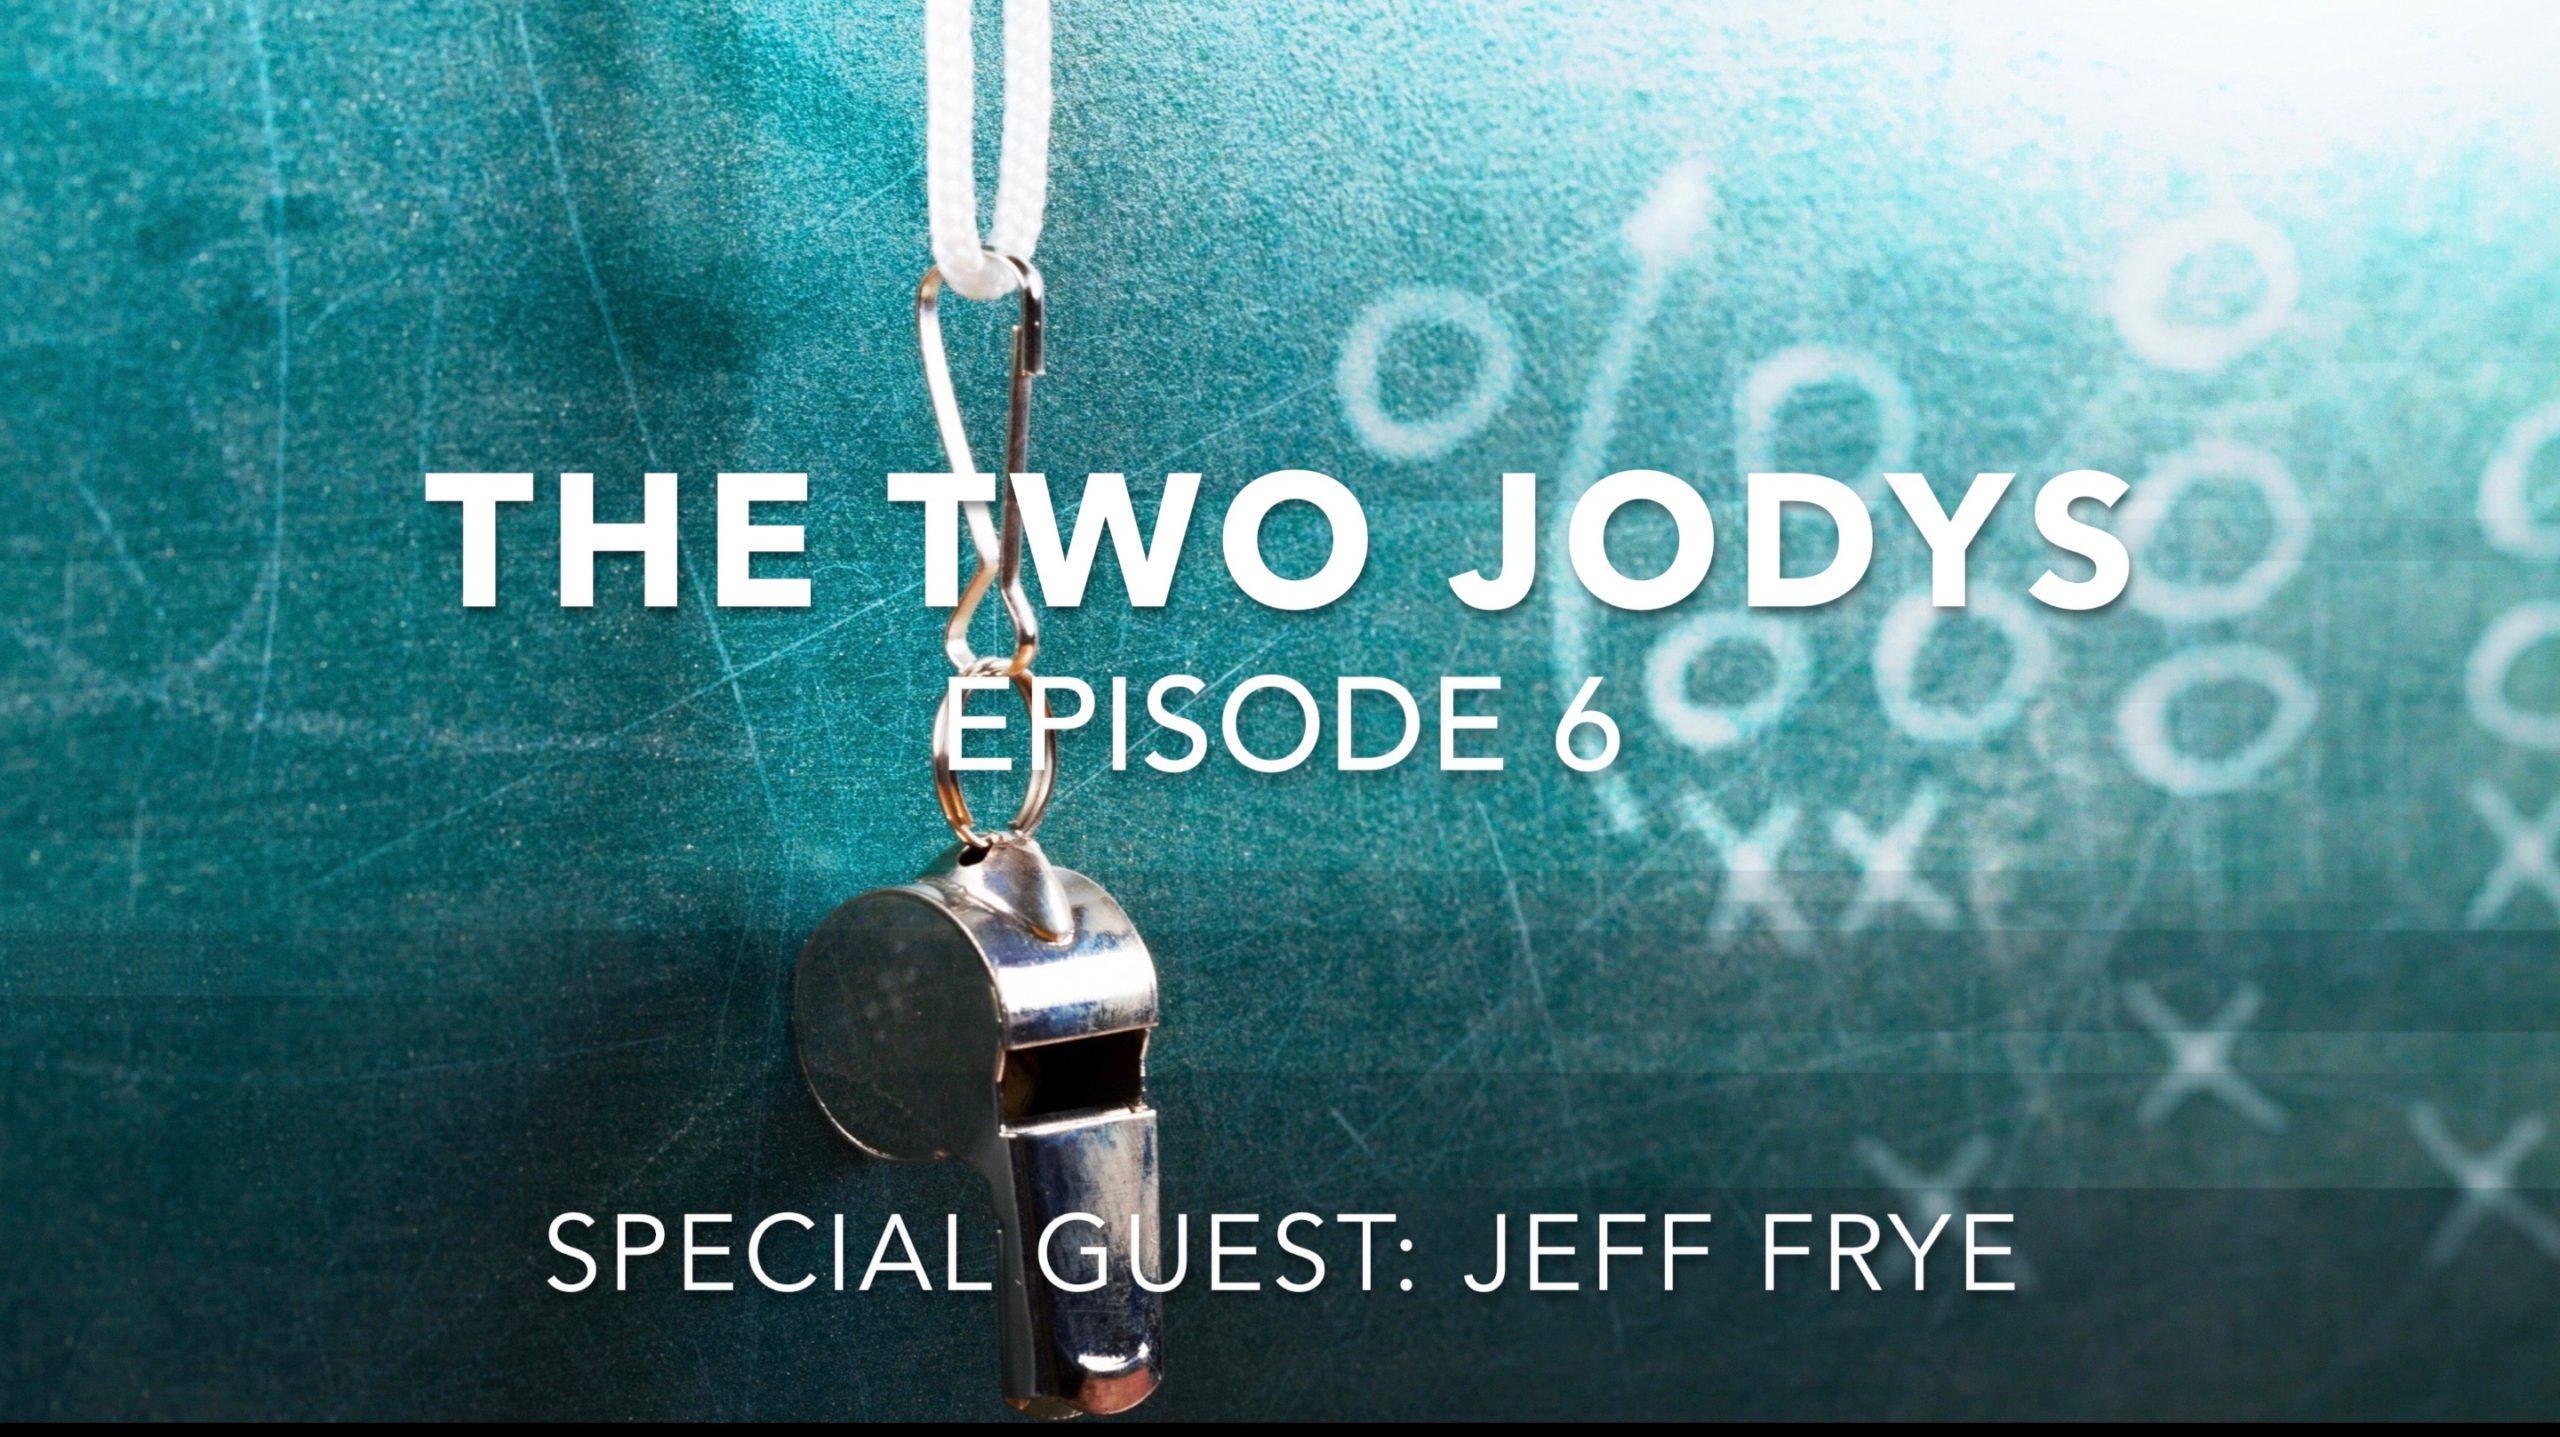 The Two Jodys: Episode #6, with special guest Jeff Frye (4.10.20)